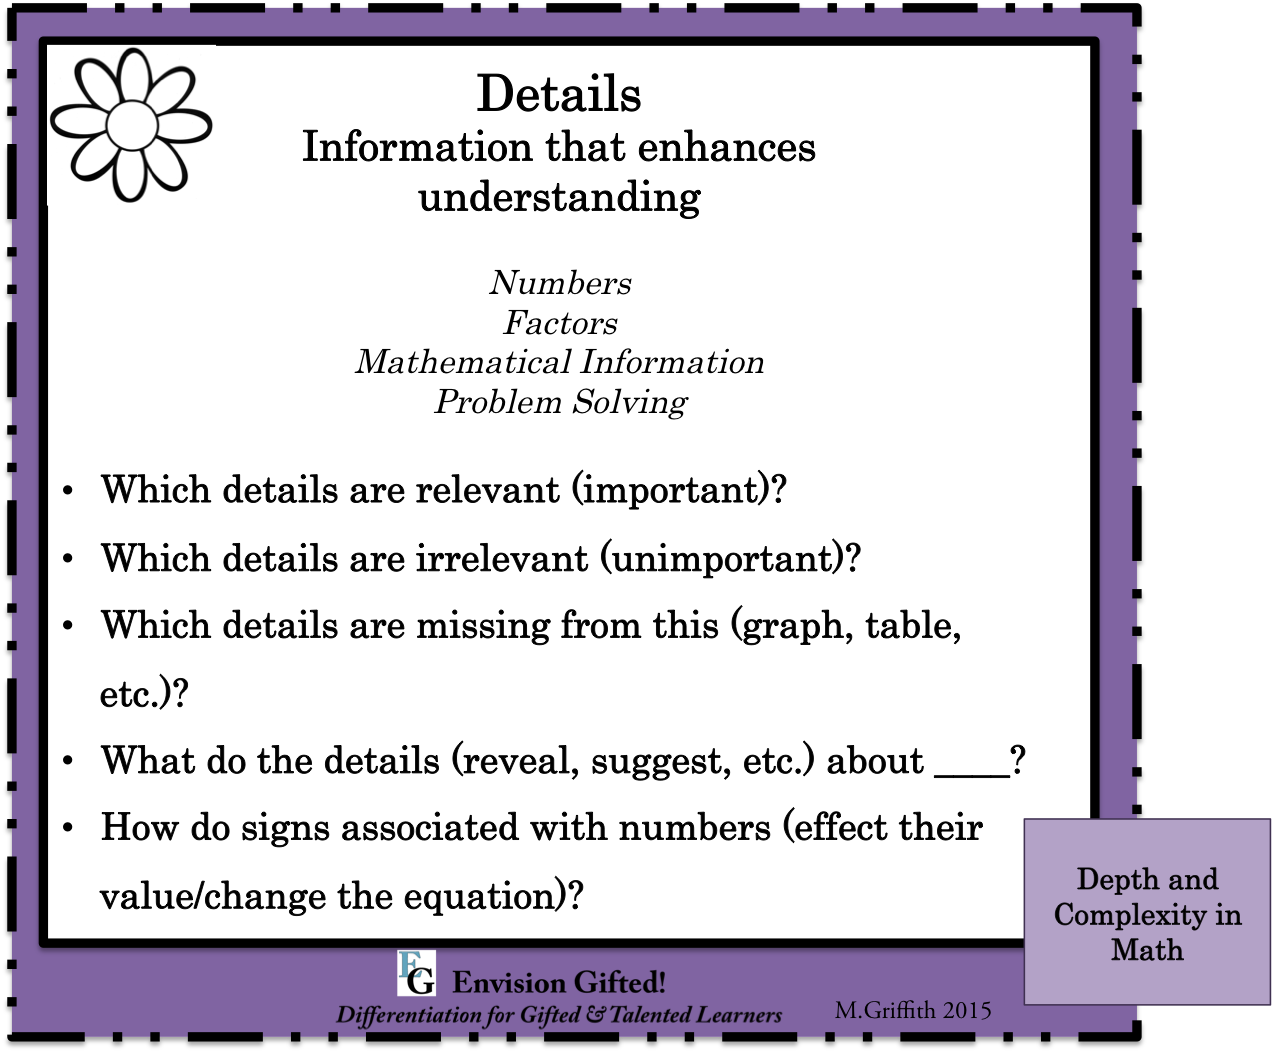 Envision Gifted. Depth and Complexity Details in Math